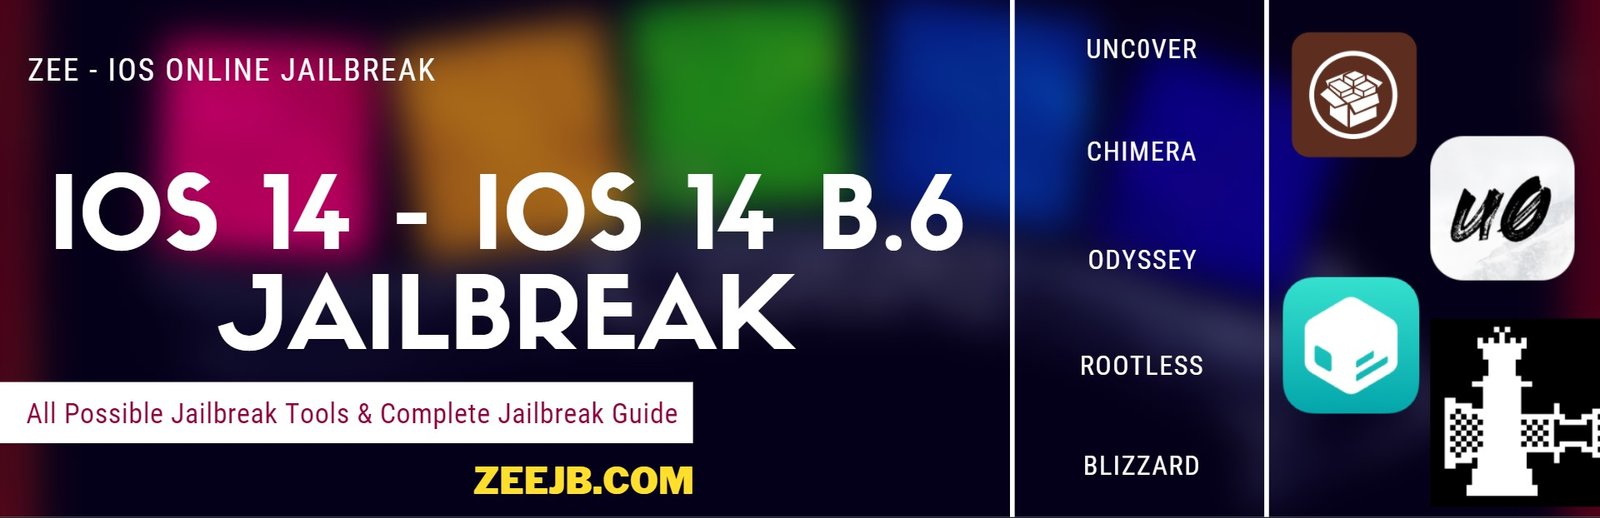 How to Jailbreak iOS 12.0 to iOS 14.0 on Your iPhone Using Checkra1n « iOS  & iPhone :: Gadget Hacks